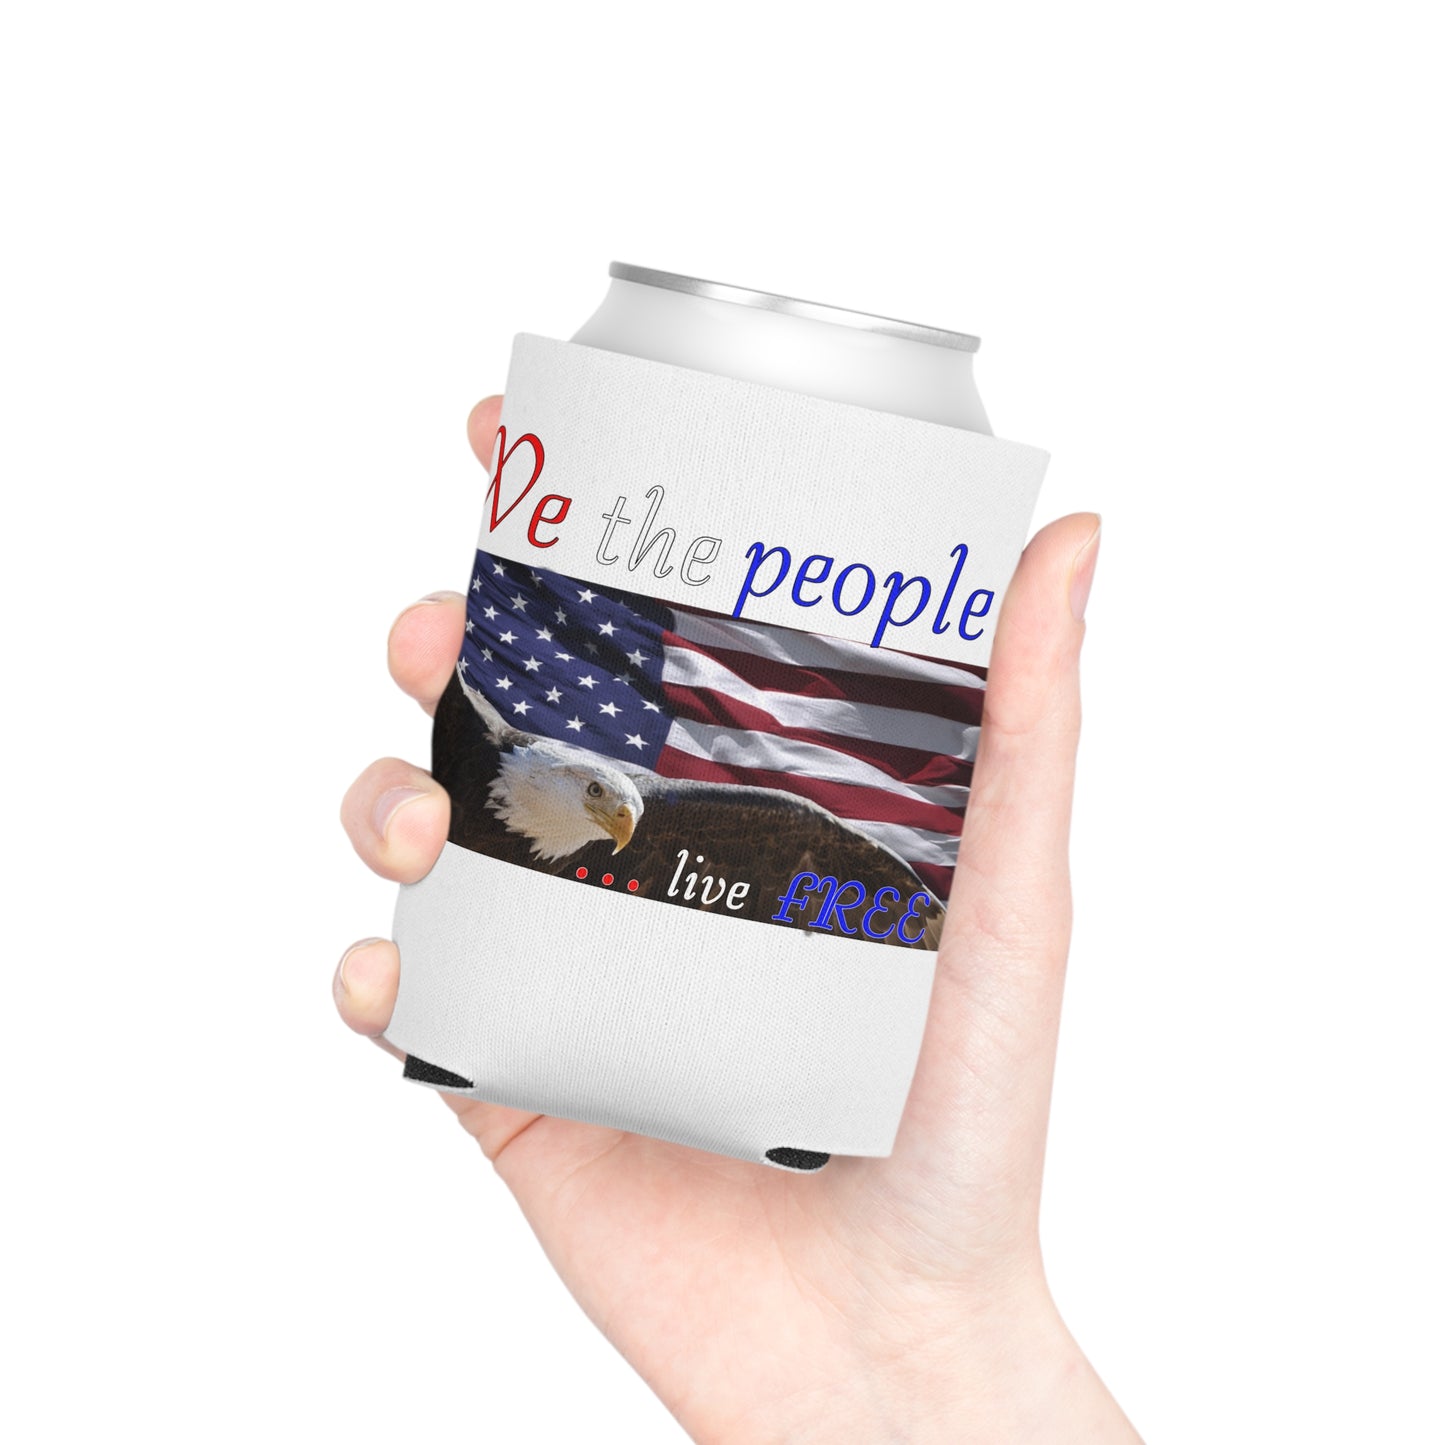 We the people, Can Cooler